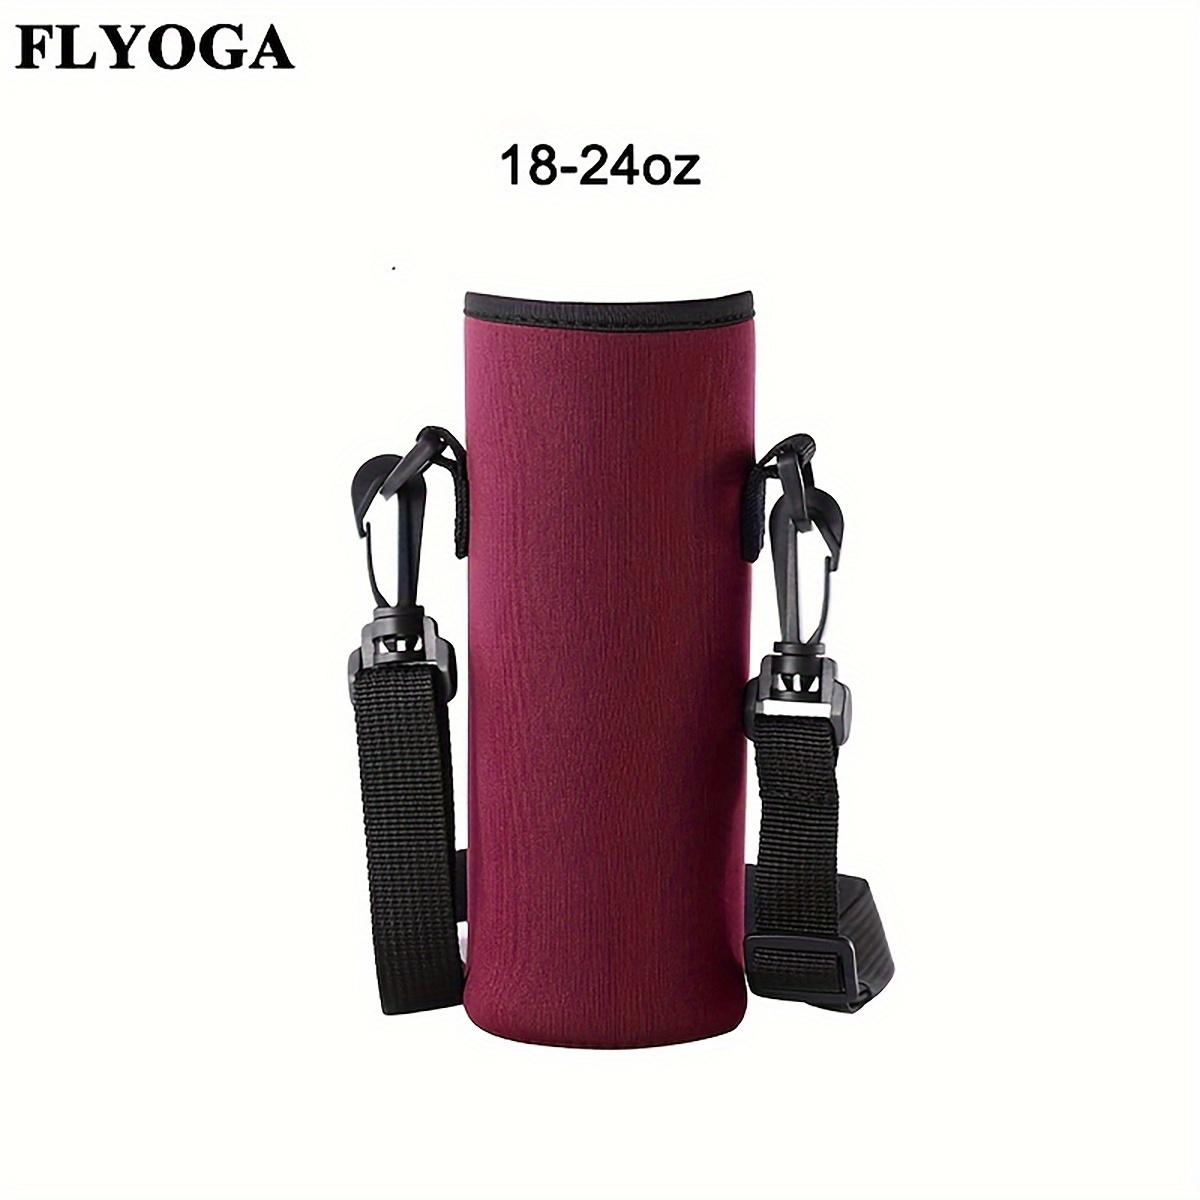 Neoprene Sublimation Tumbler Holder With Shoulder Strap 40oz Capacity, Heat  Transfer, Ideal For Travel And DIY Best Insulated Drinkware From  Weaving_web, $1.97